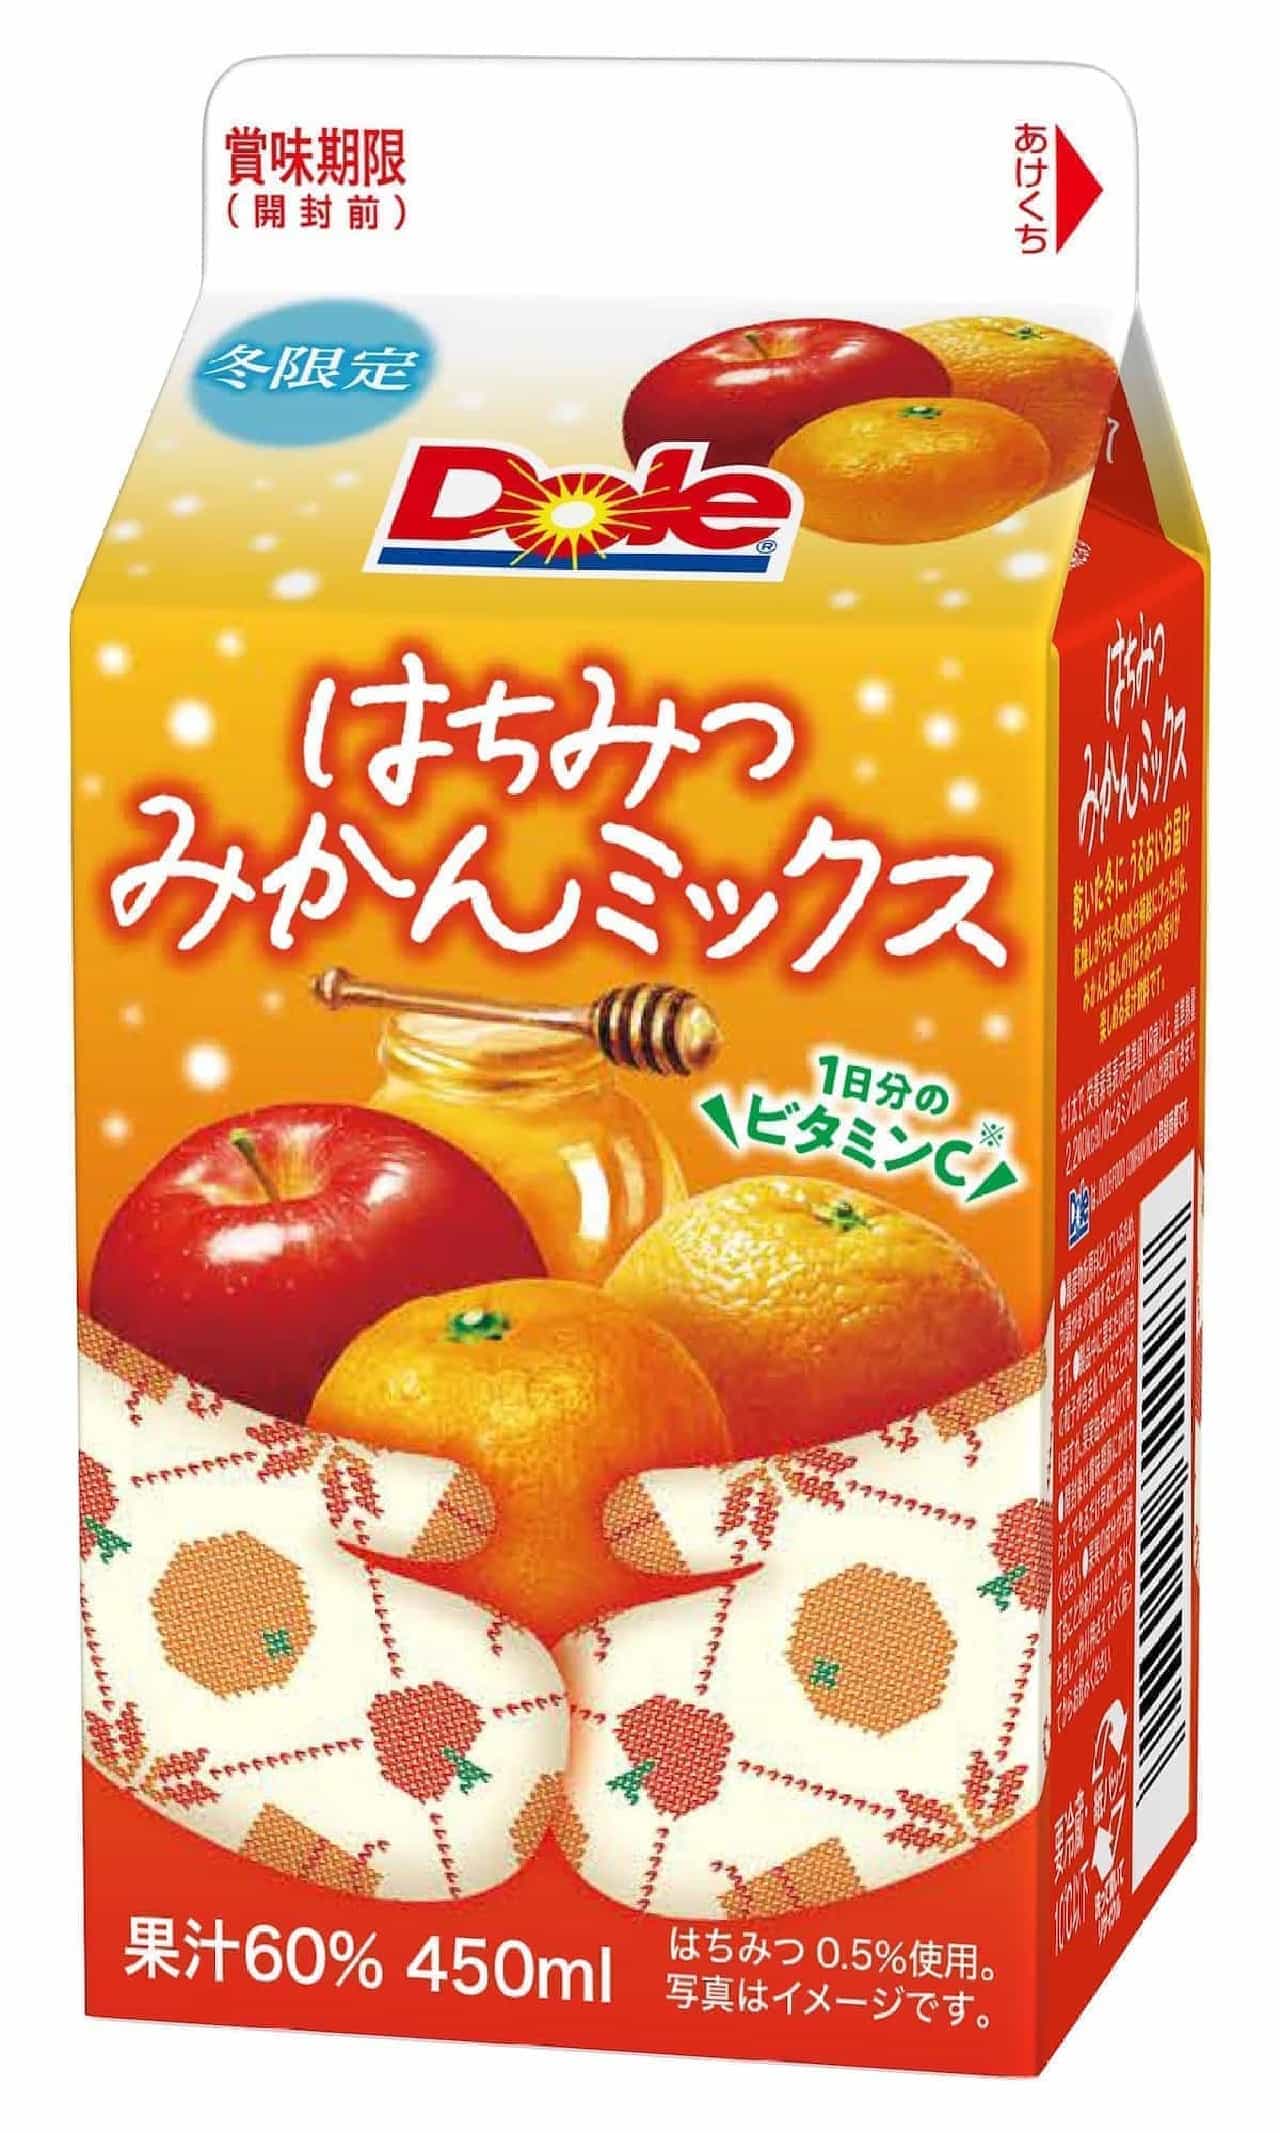 "Dole Honey Mandarin Mix" for a limited time